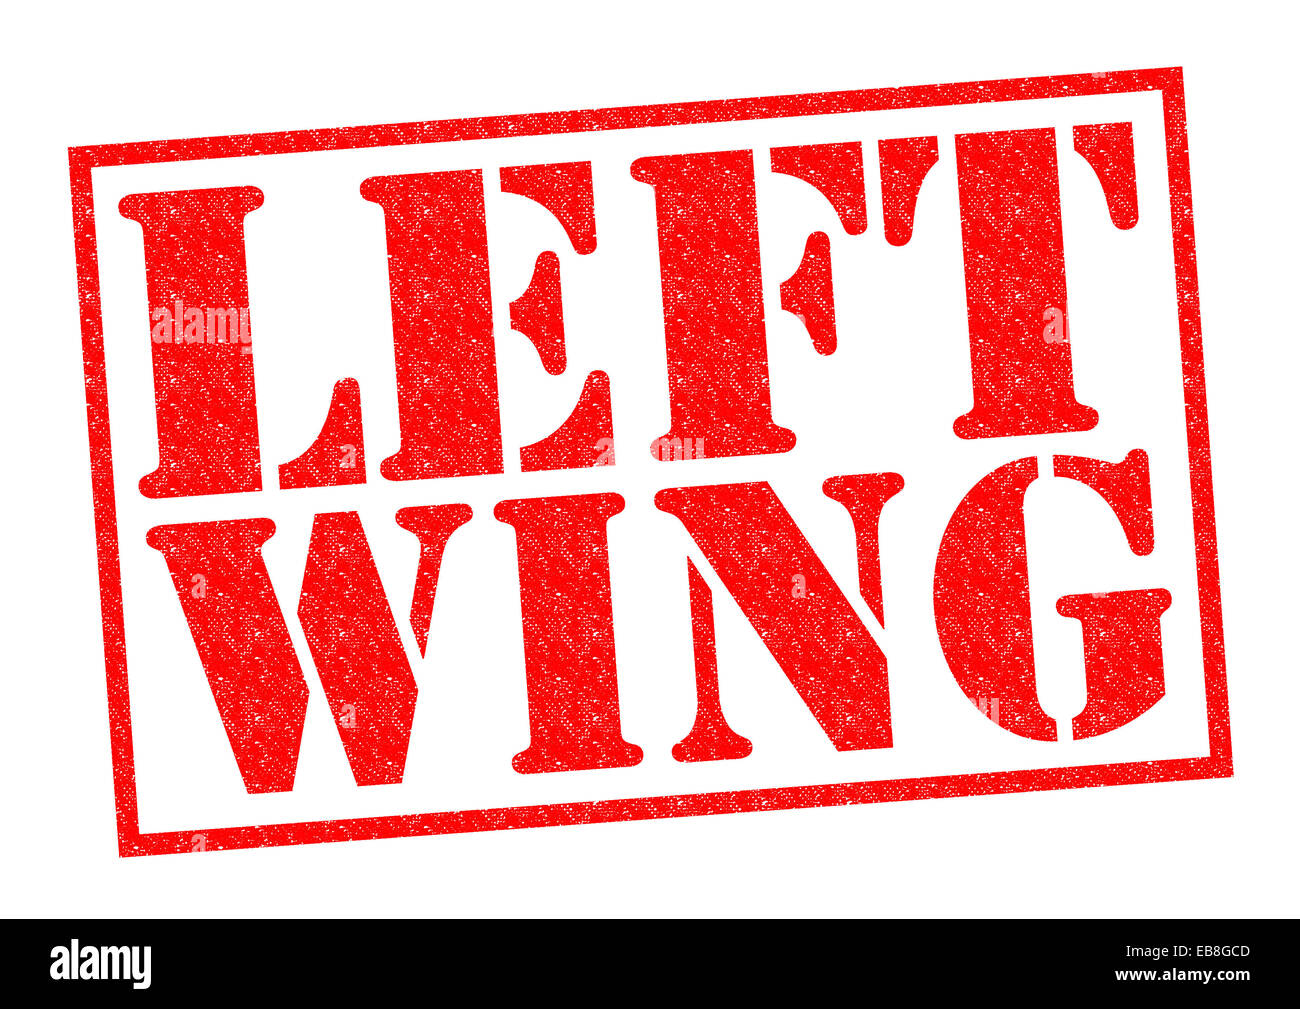 LEFT WING red Rubber Stamp over a white background. Stock Photo